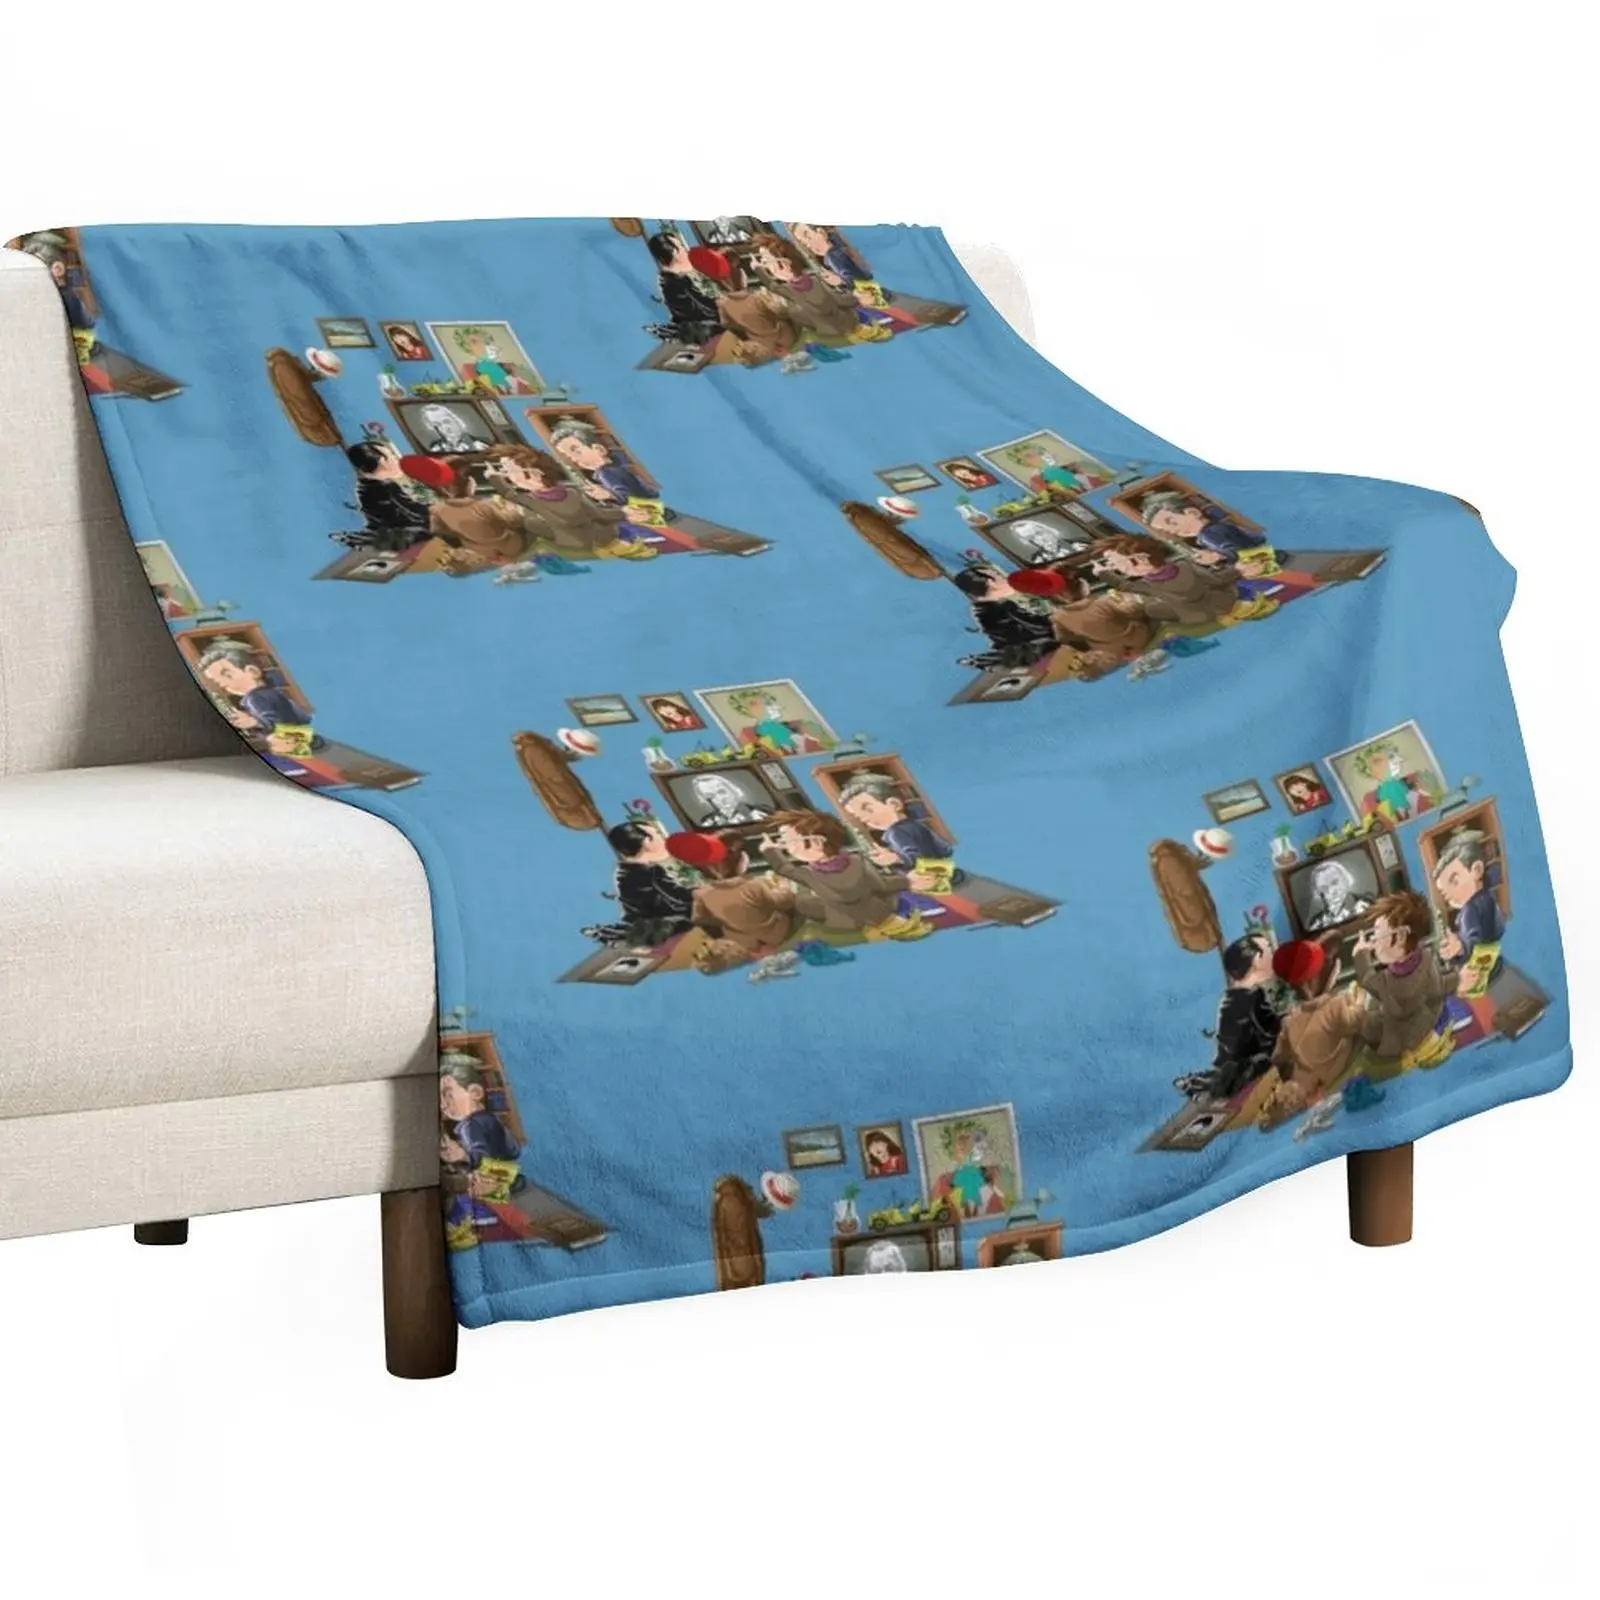 

New 50 Years of The Doctor Throw Blanket Cute Blanket For Sofa Flannel Fabric Furry Blankets